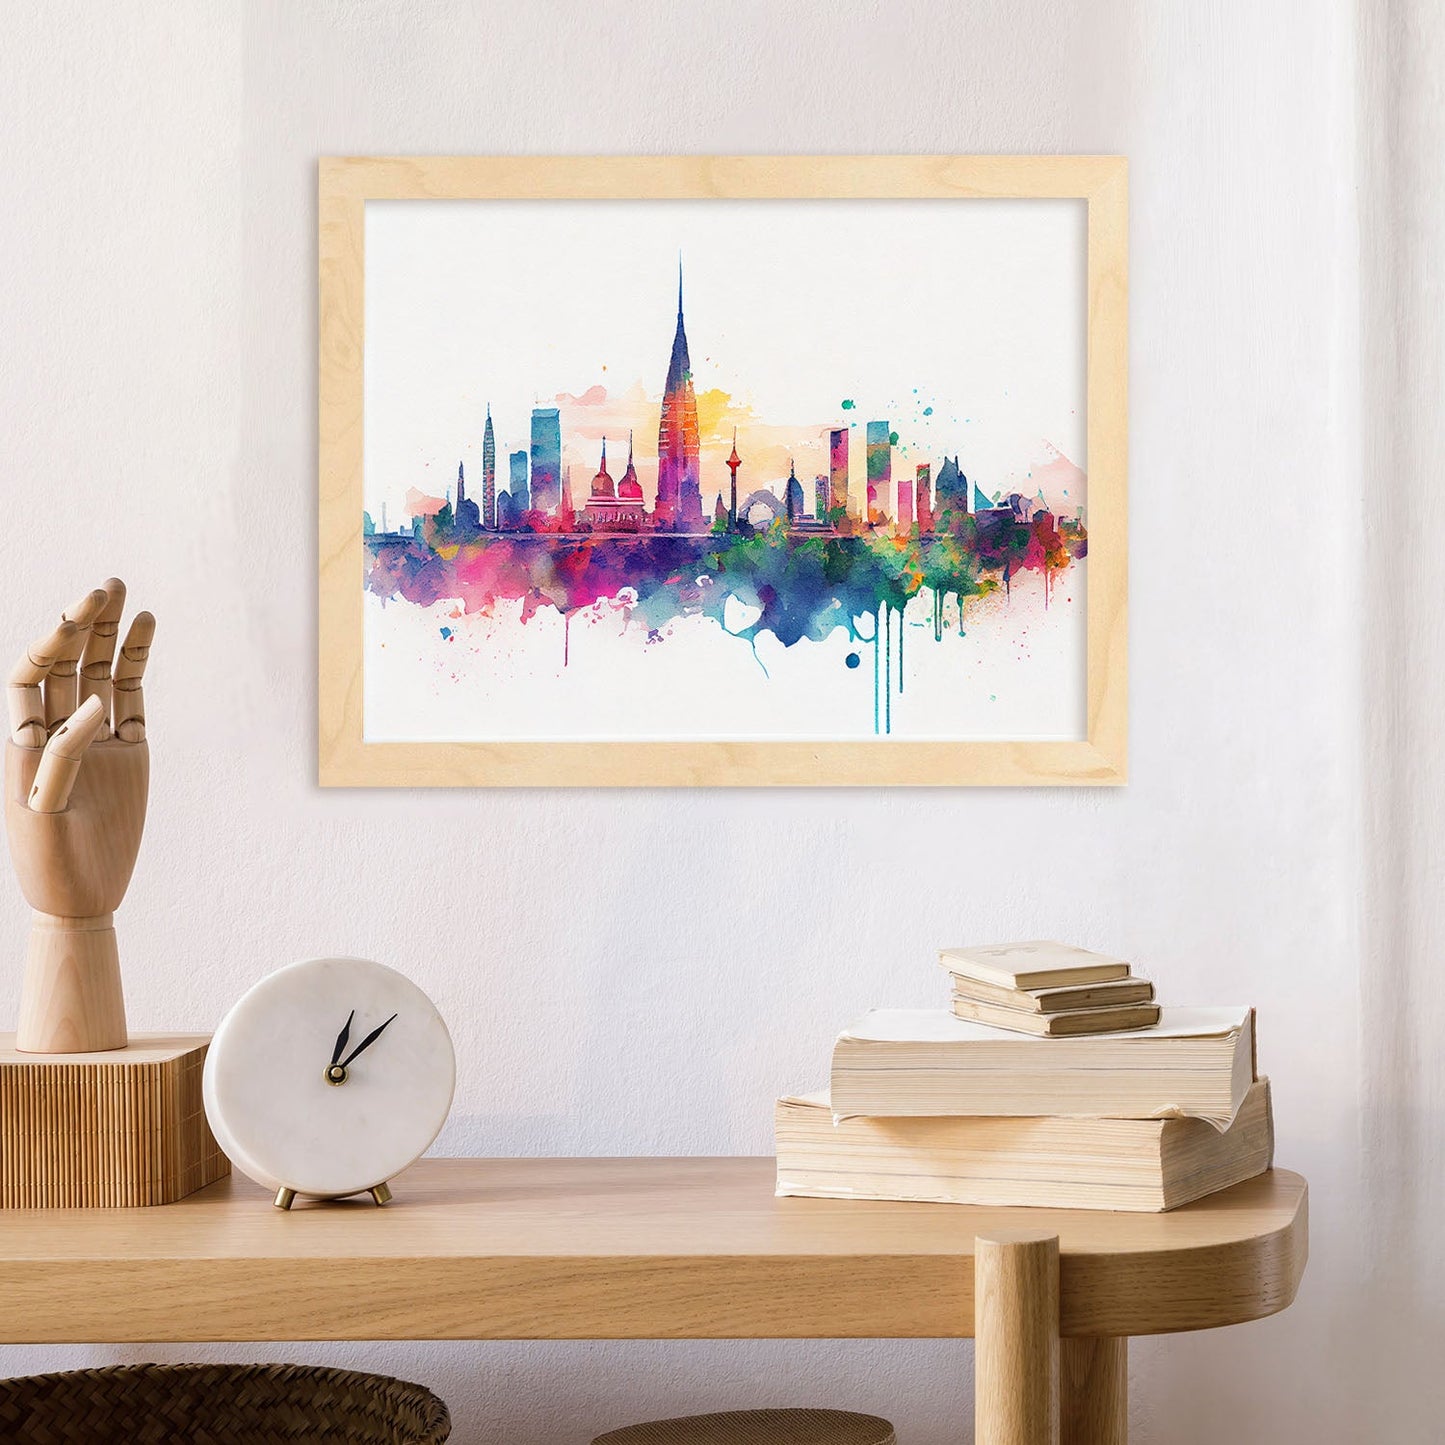 Nacnic watercolor of a skyline of the city of Bangkok. Aesthetic Wall Art Prints for Bedroom or Living Room Design.